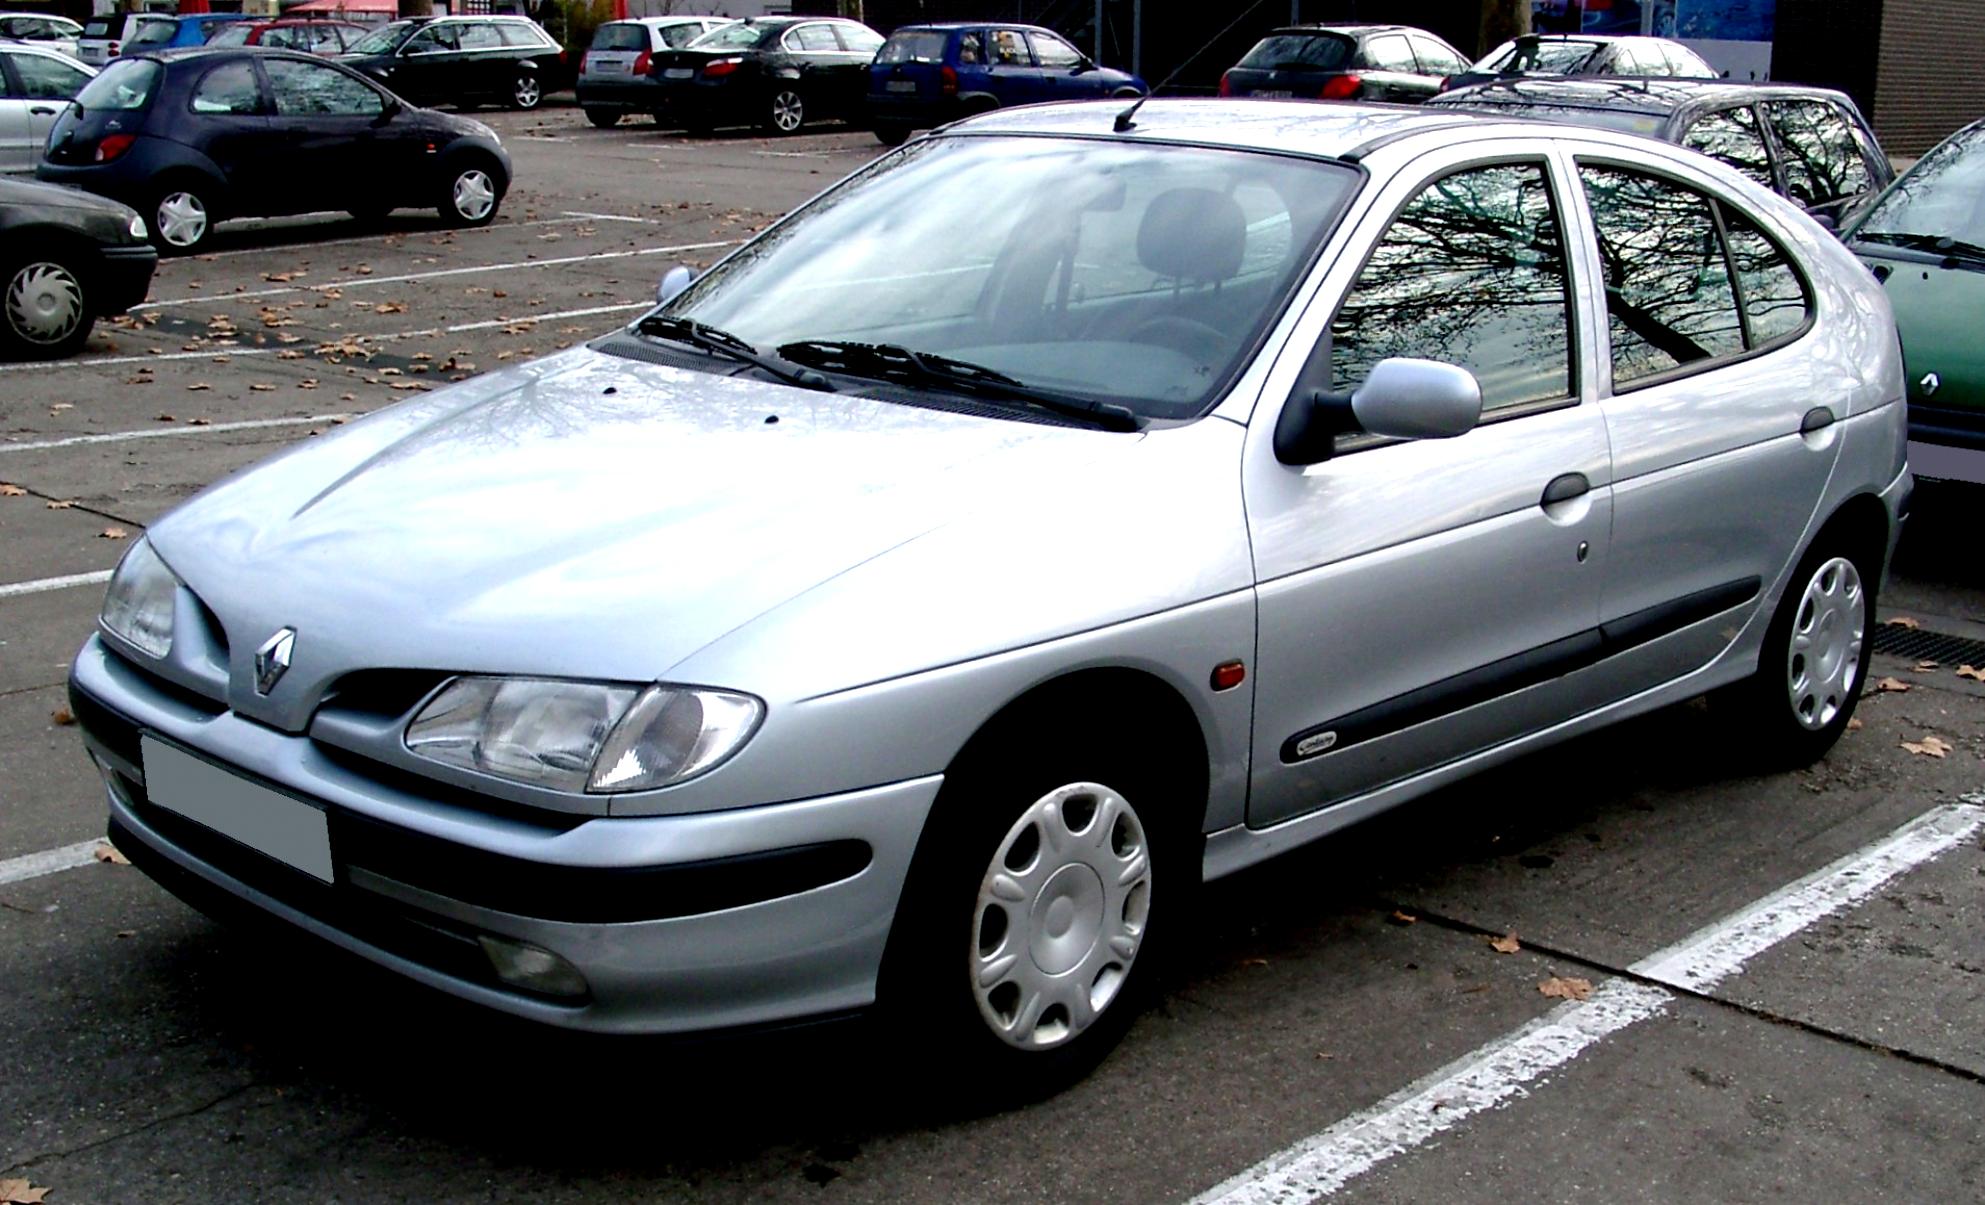 Renault Megane Coupe 1996 on